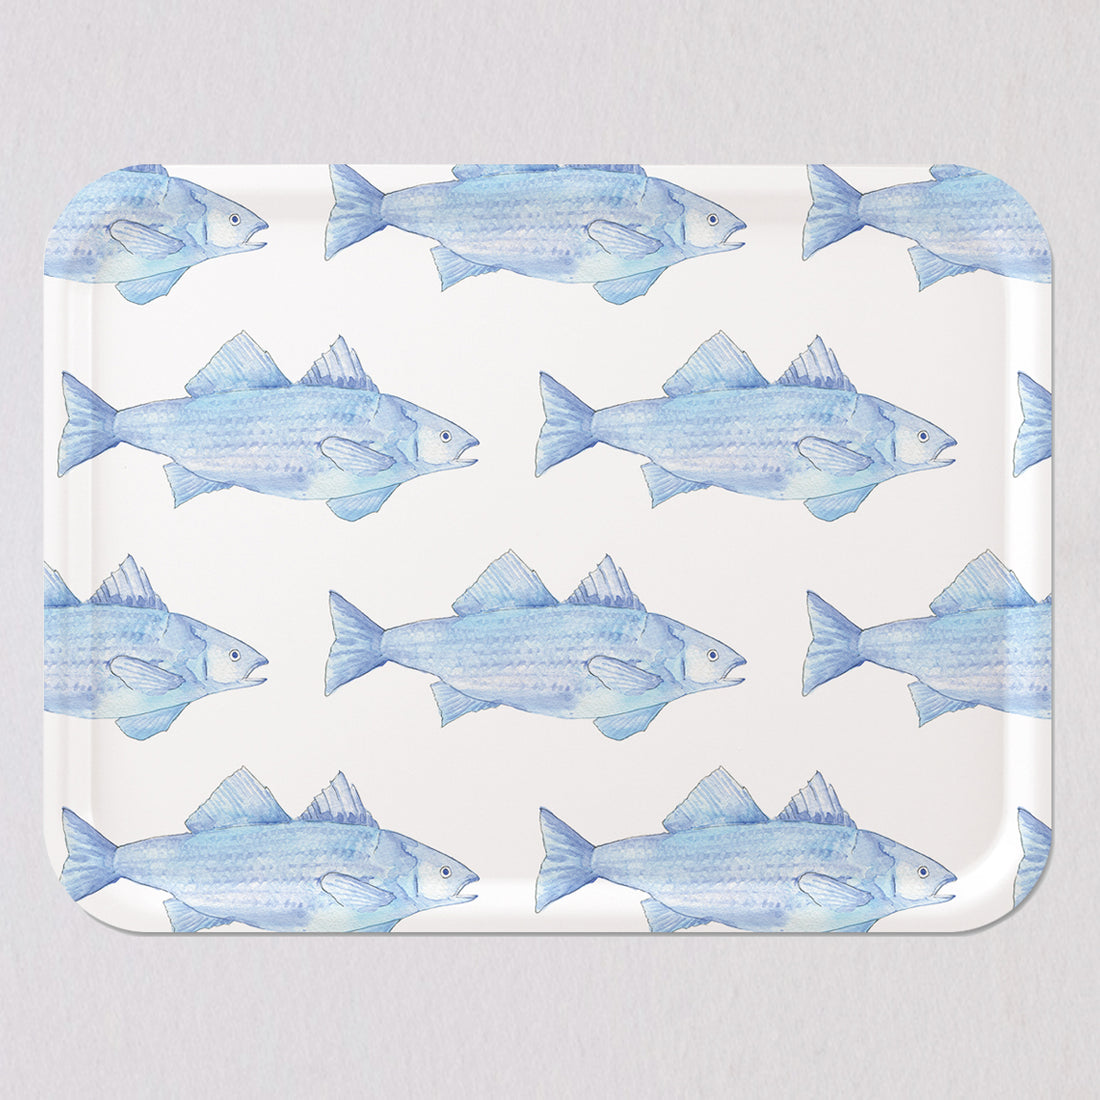 Stylish And Unique fish tray For Events 